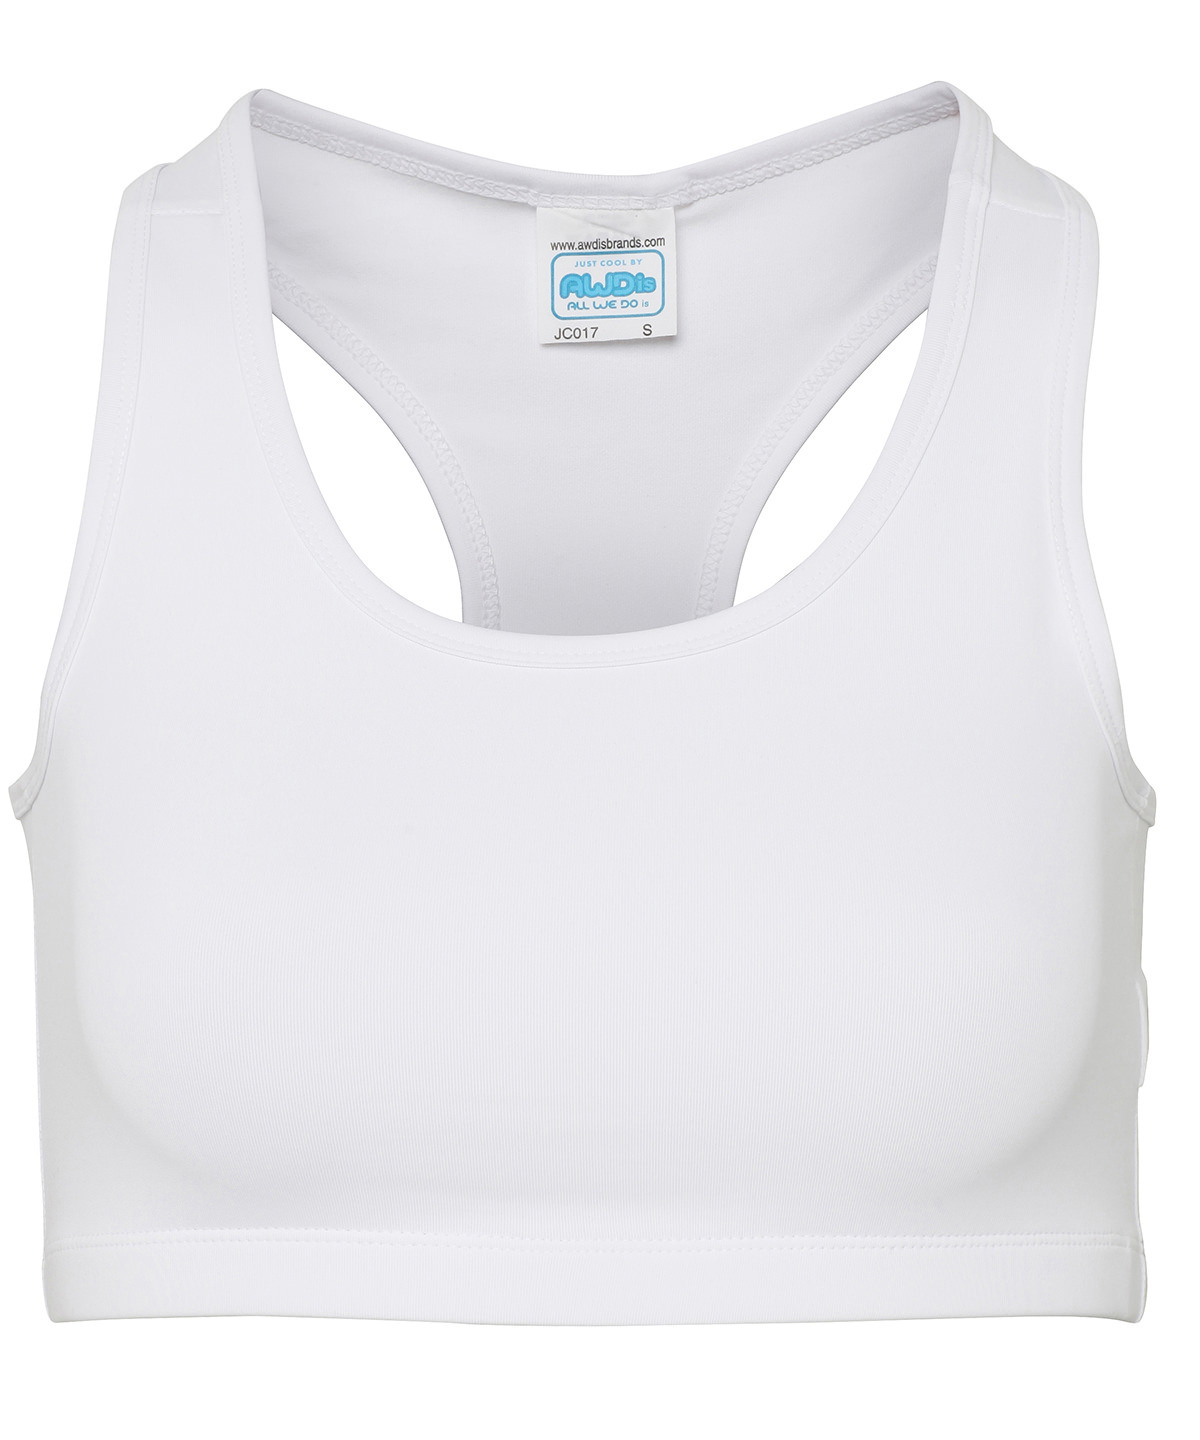 Womens Cool Sports Crop Top Arctic White Size XSmall